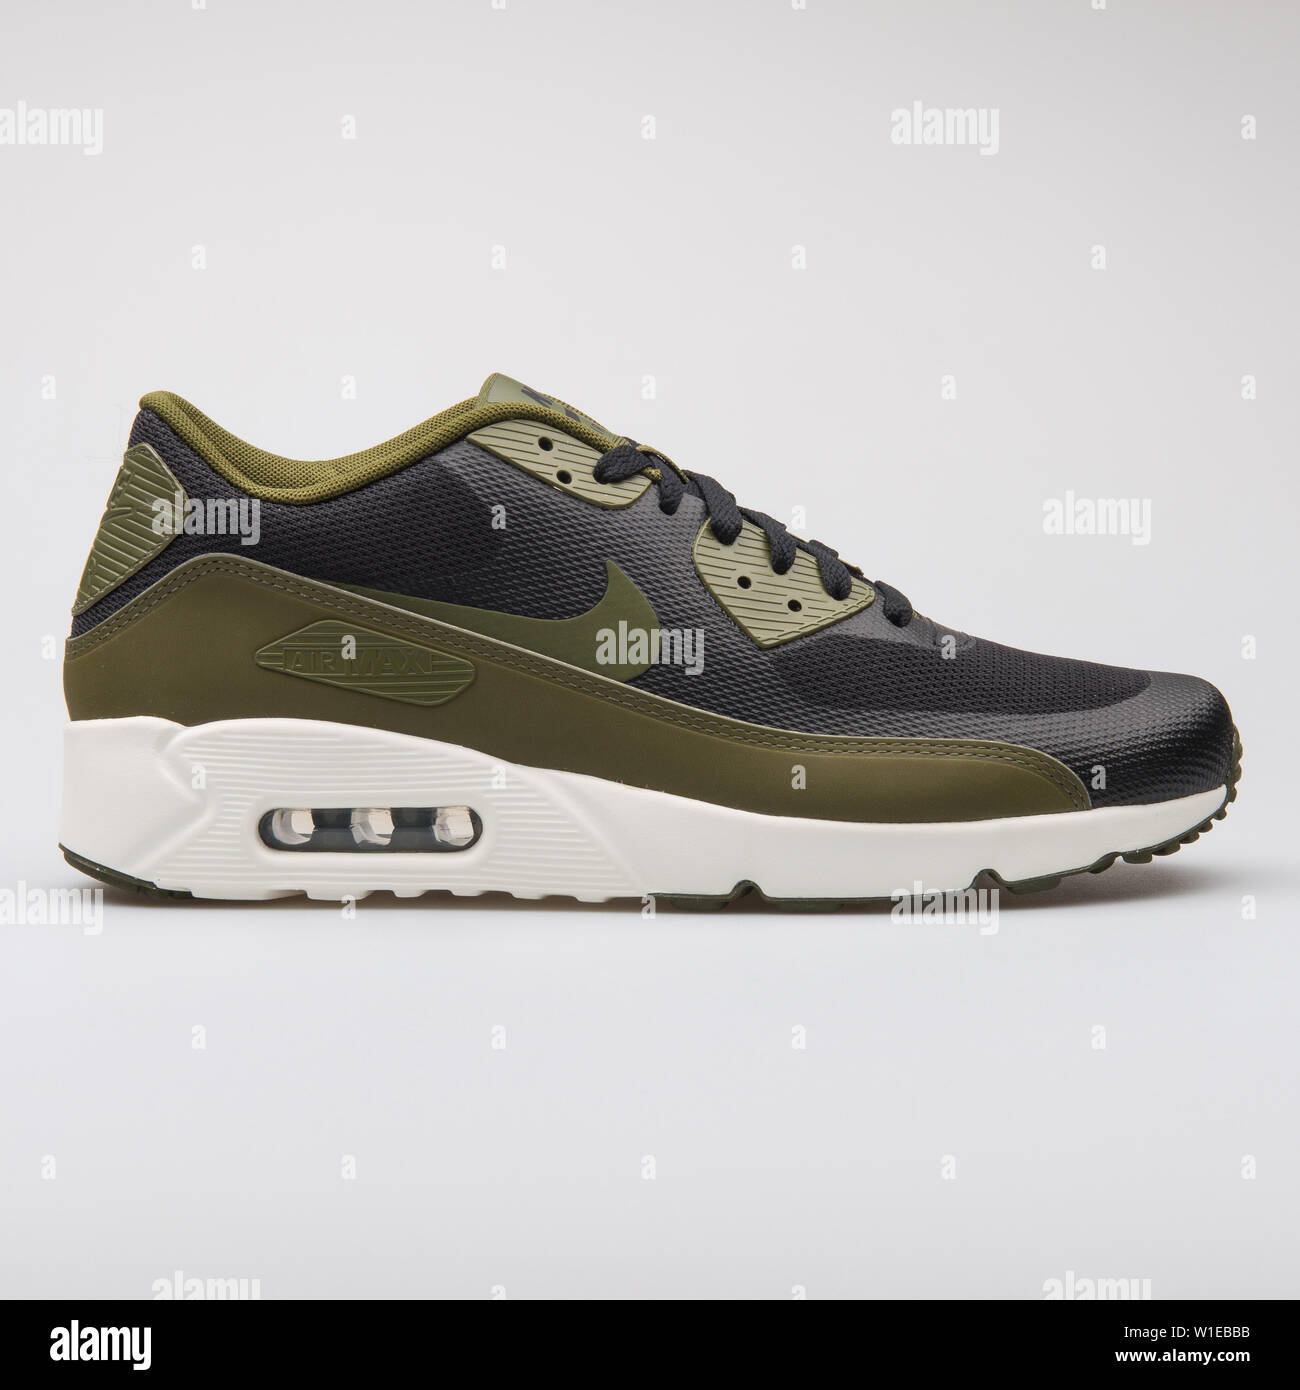 Nike Air Max 90 Essential Noire Chaussures Baskets homme